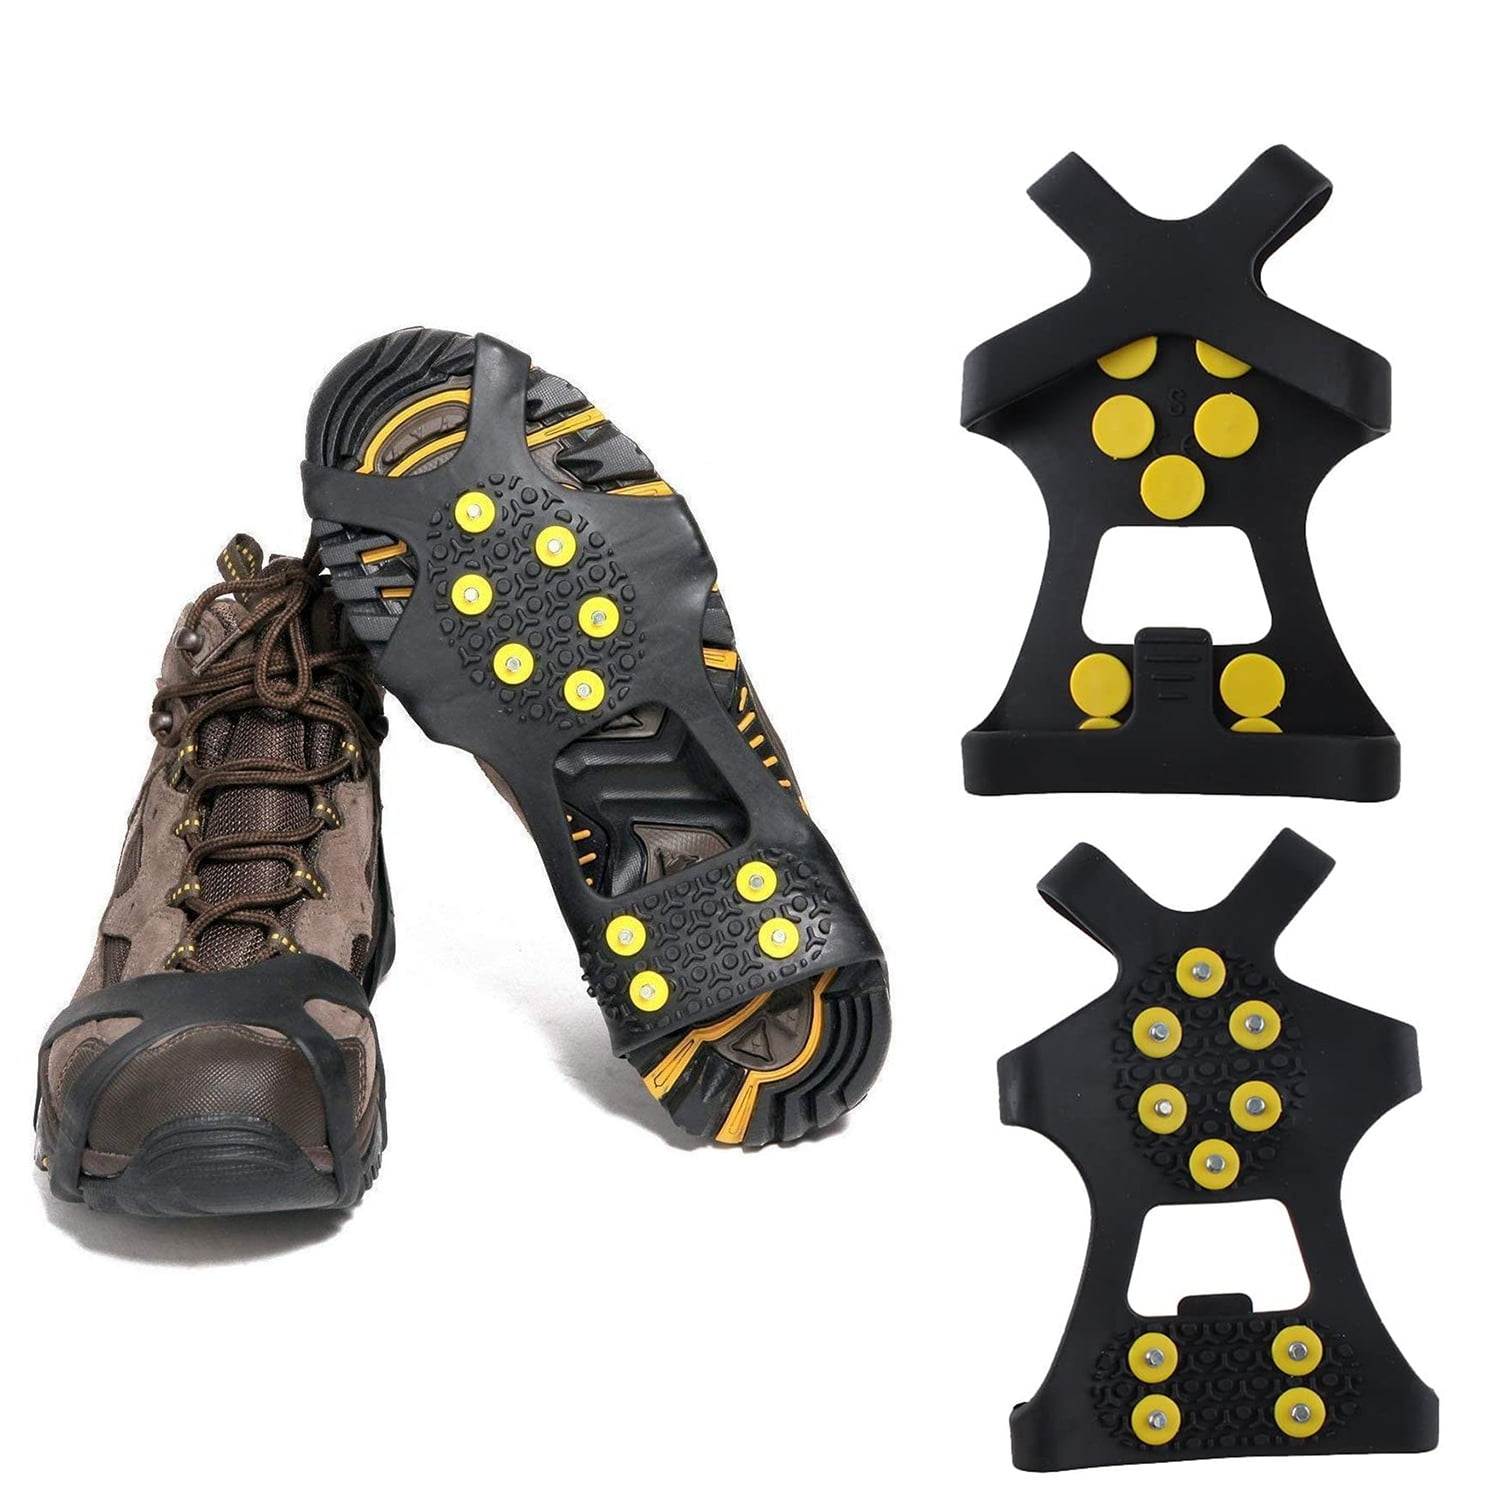 Ice Snow Anti Slip Spike-s Grips Grippers Crampon Cleats For Shoes Boot Overshoe 